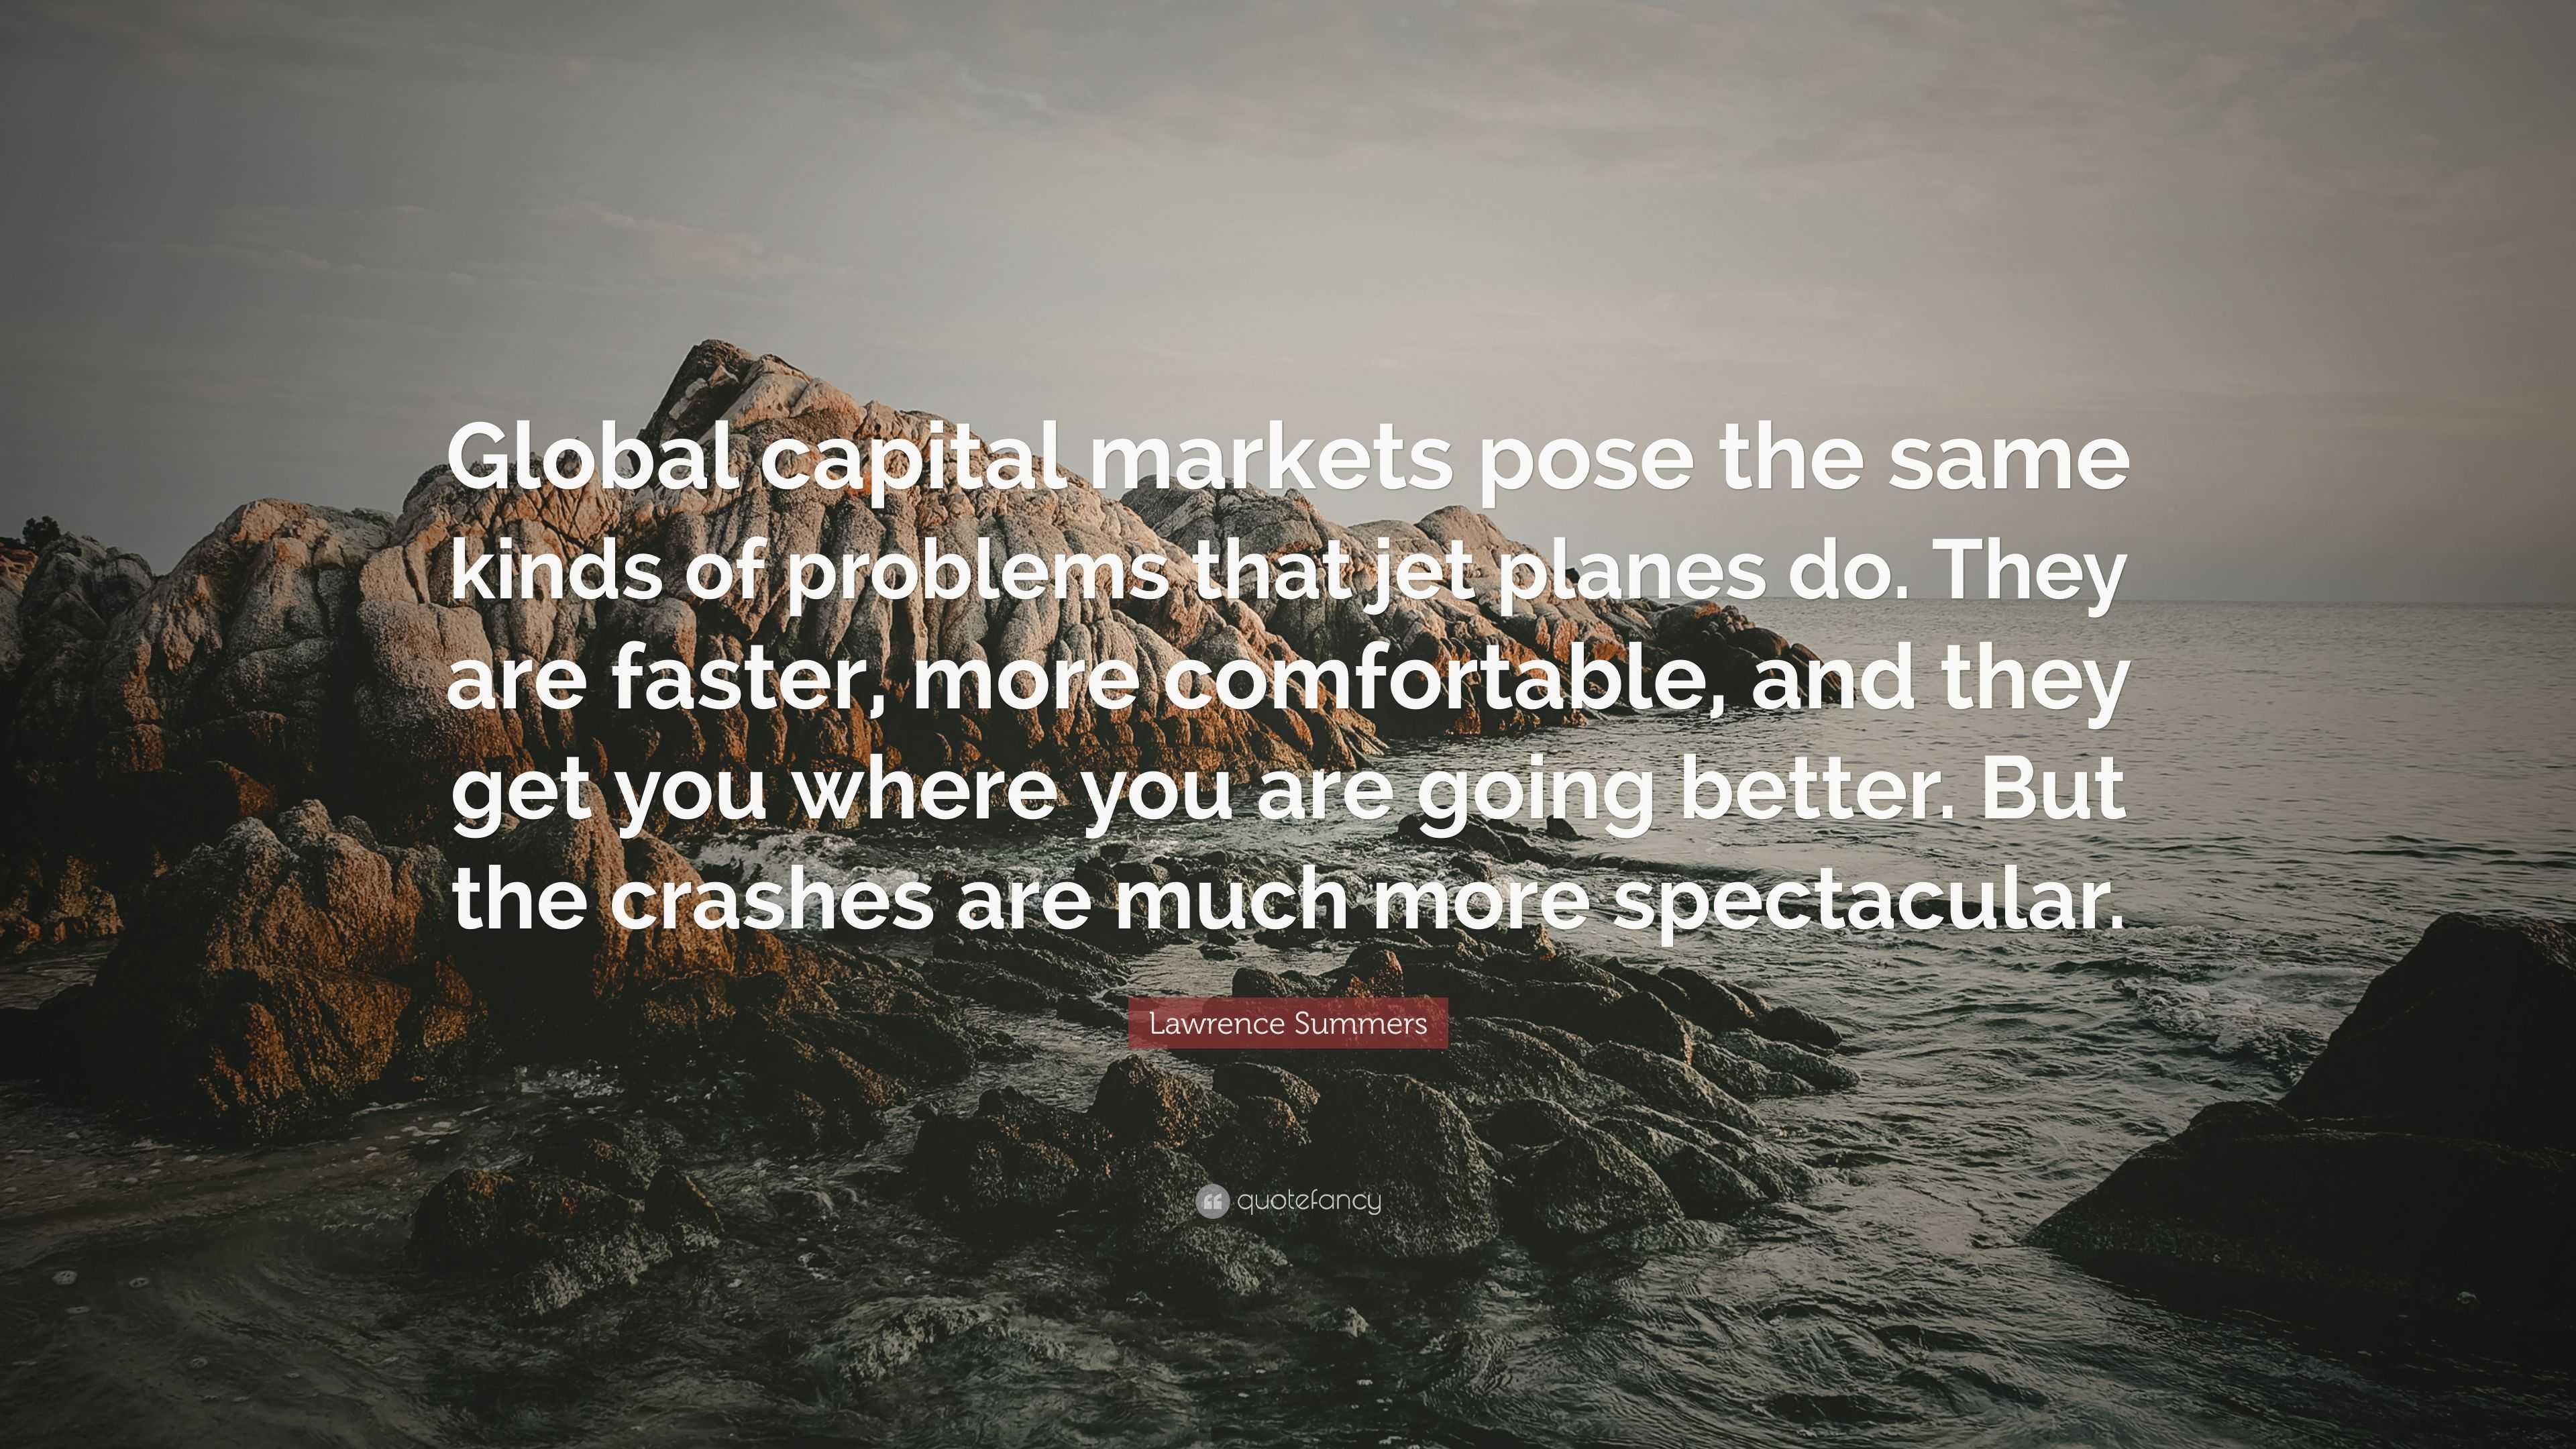 5934396 Lawrence Summers Quote Global capital markets pose the same kinds